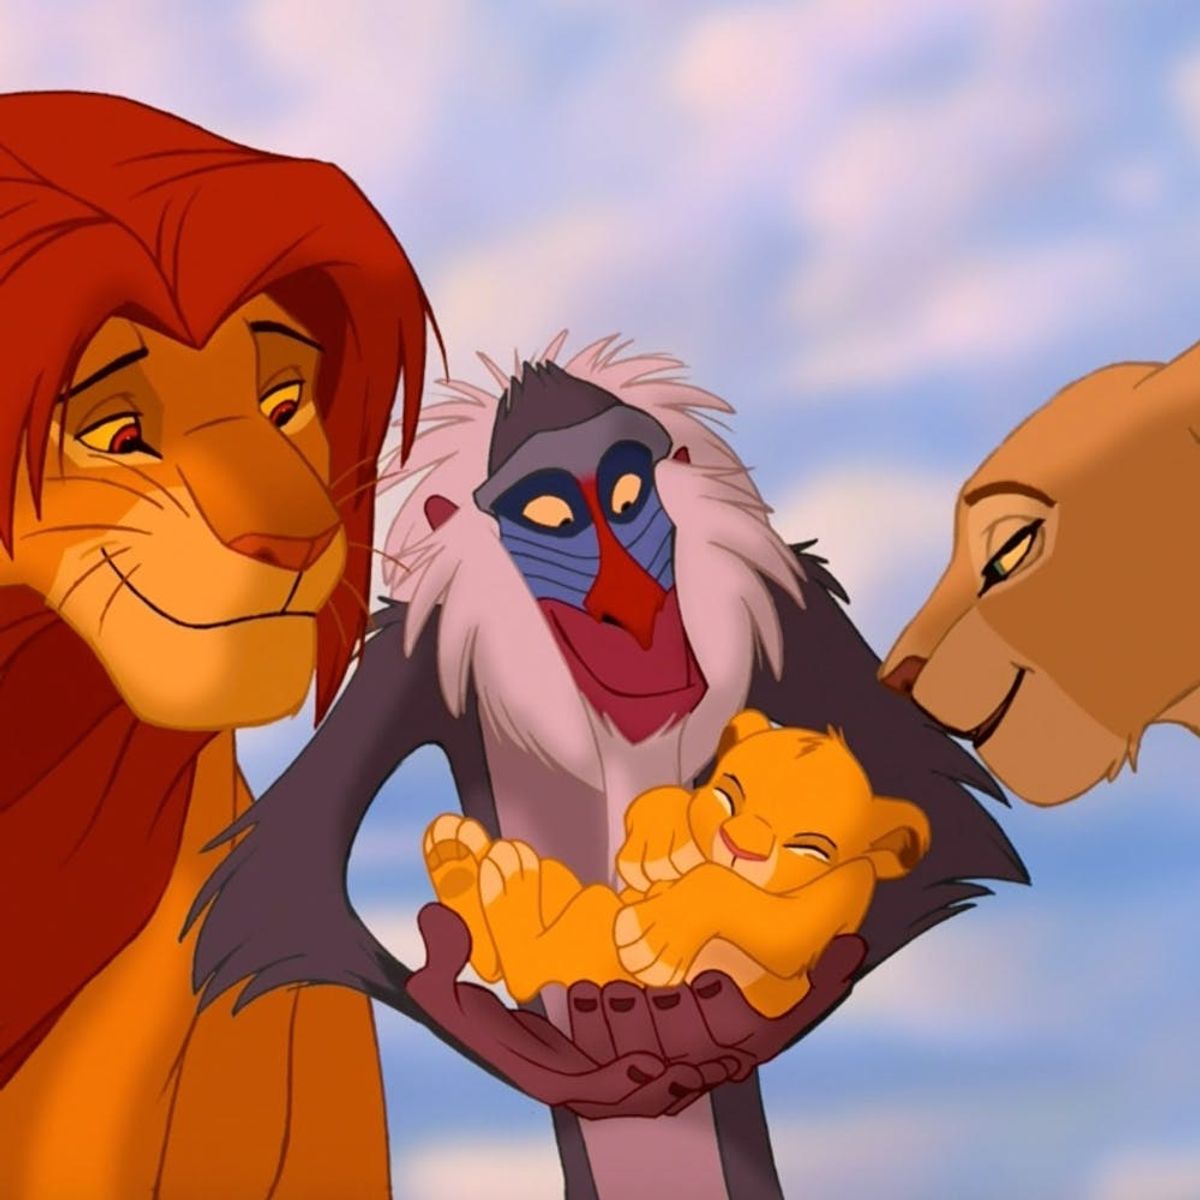 Big News: A Live-Action Lion King Movie Is Happening!